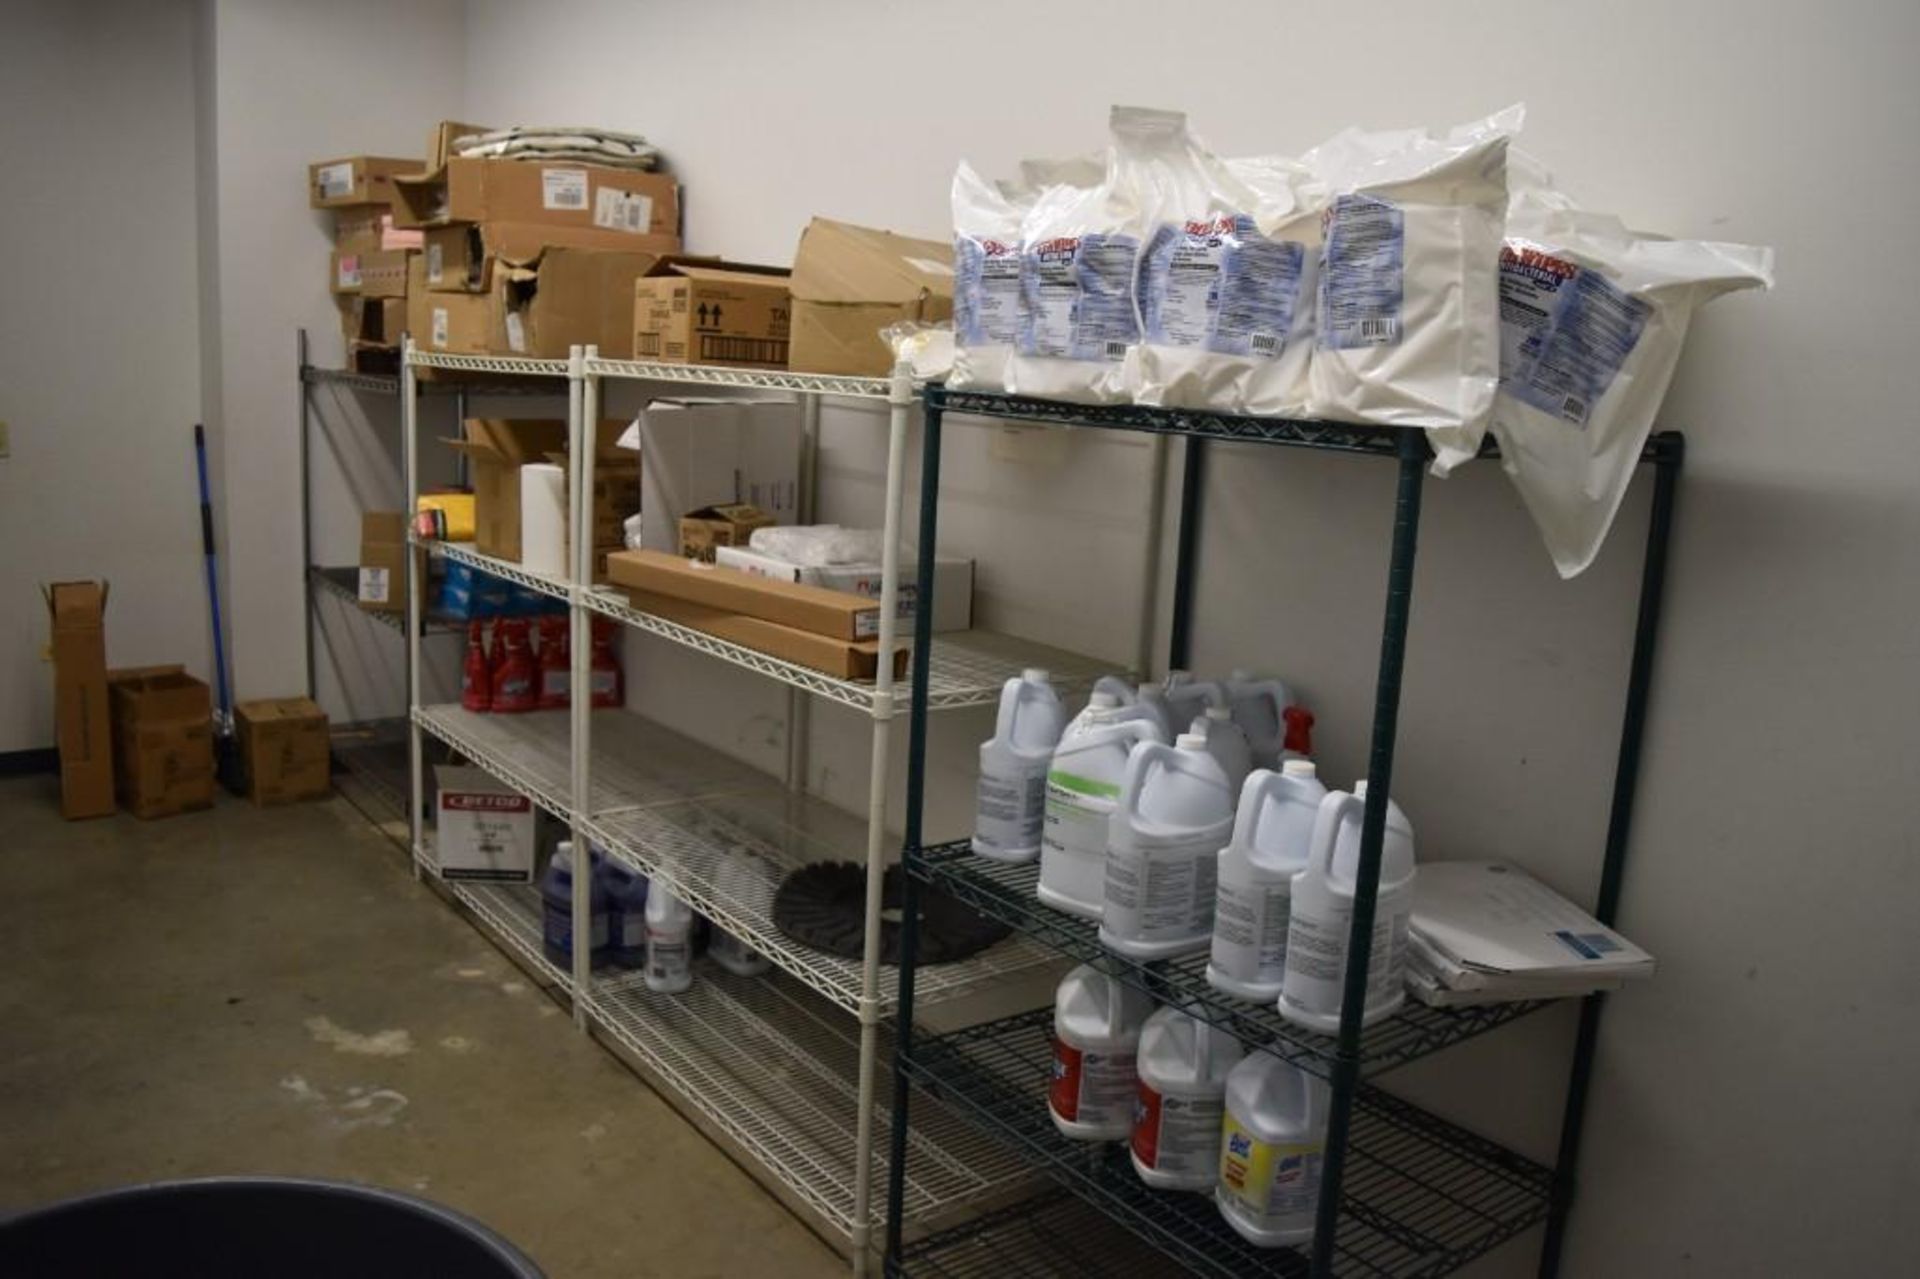 Lot c/o: Contents Custodial Room- Shelves w/Contents, Trash Cans, Vacuum, See Pictures - Image 4 of 5